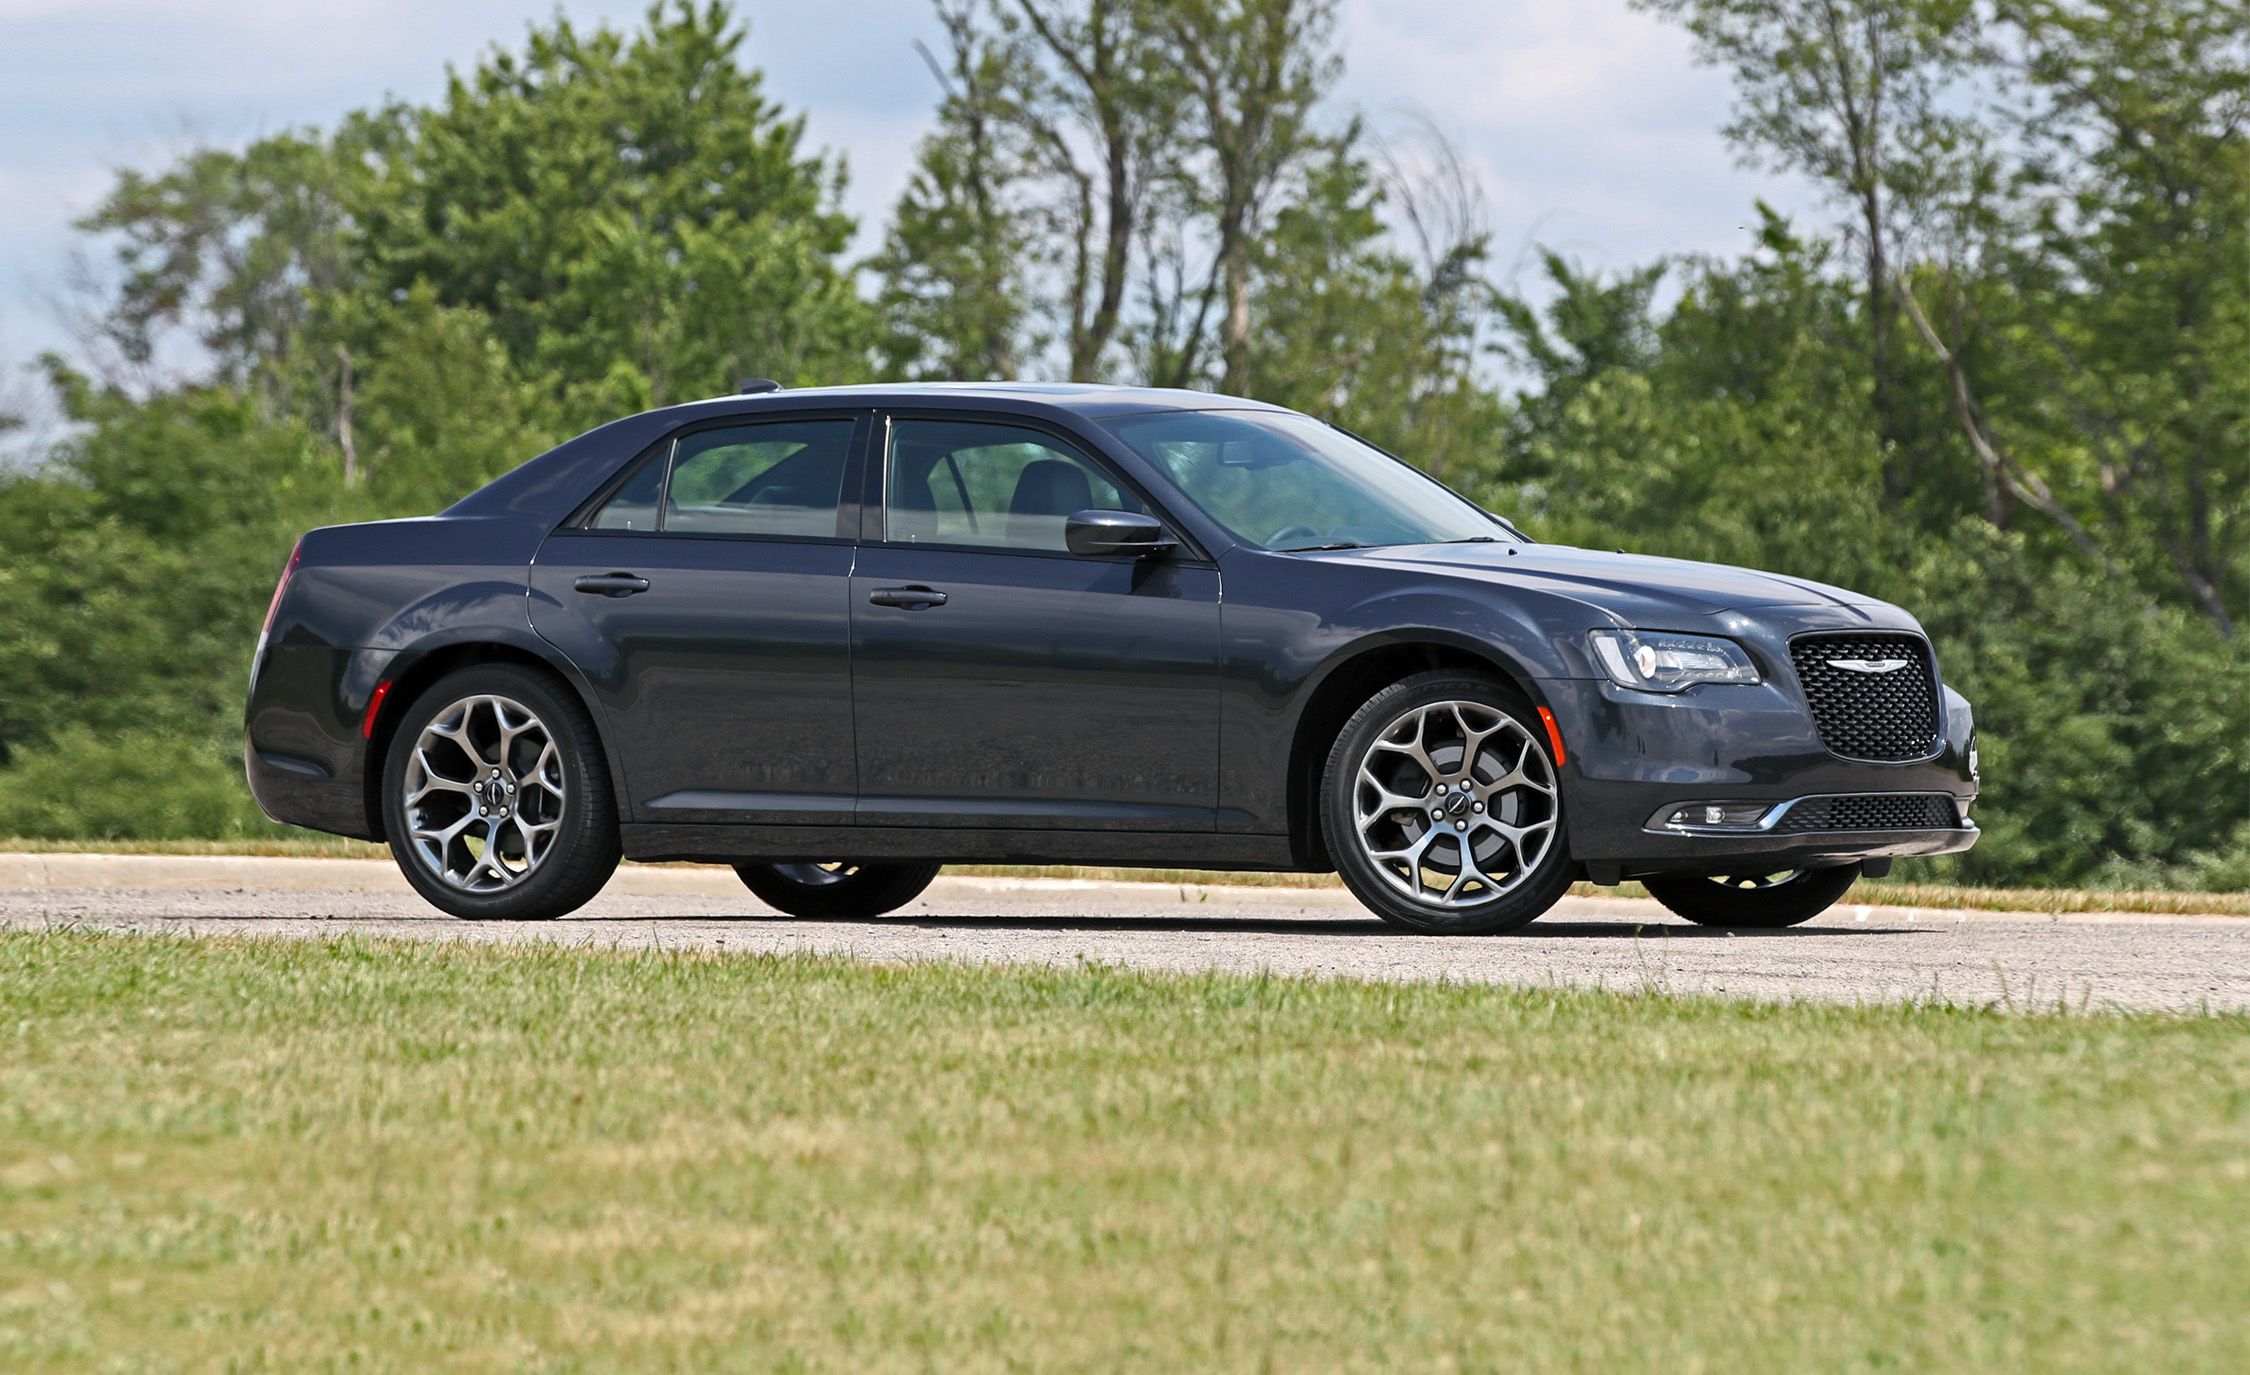 2017 Chrysler 300 review: An old dog that could use some newer tricks - CNET